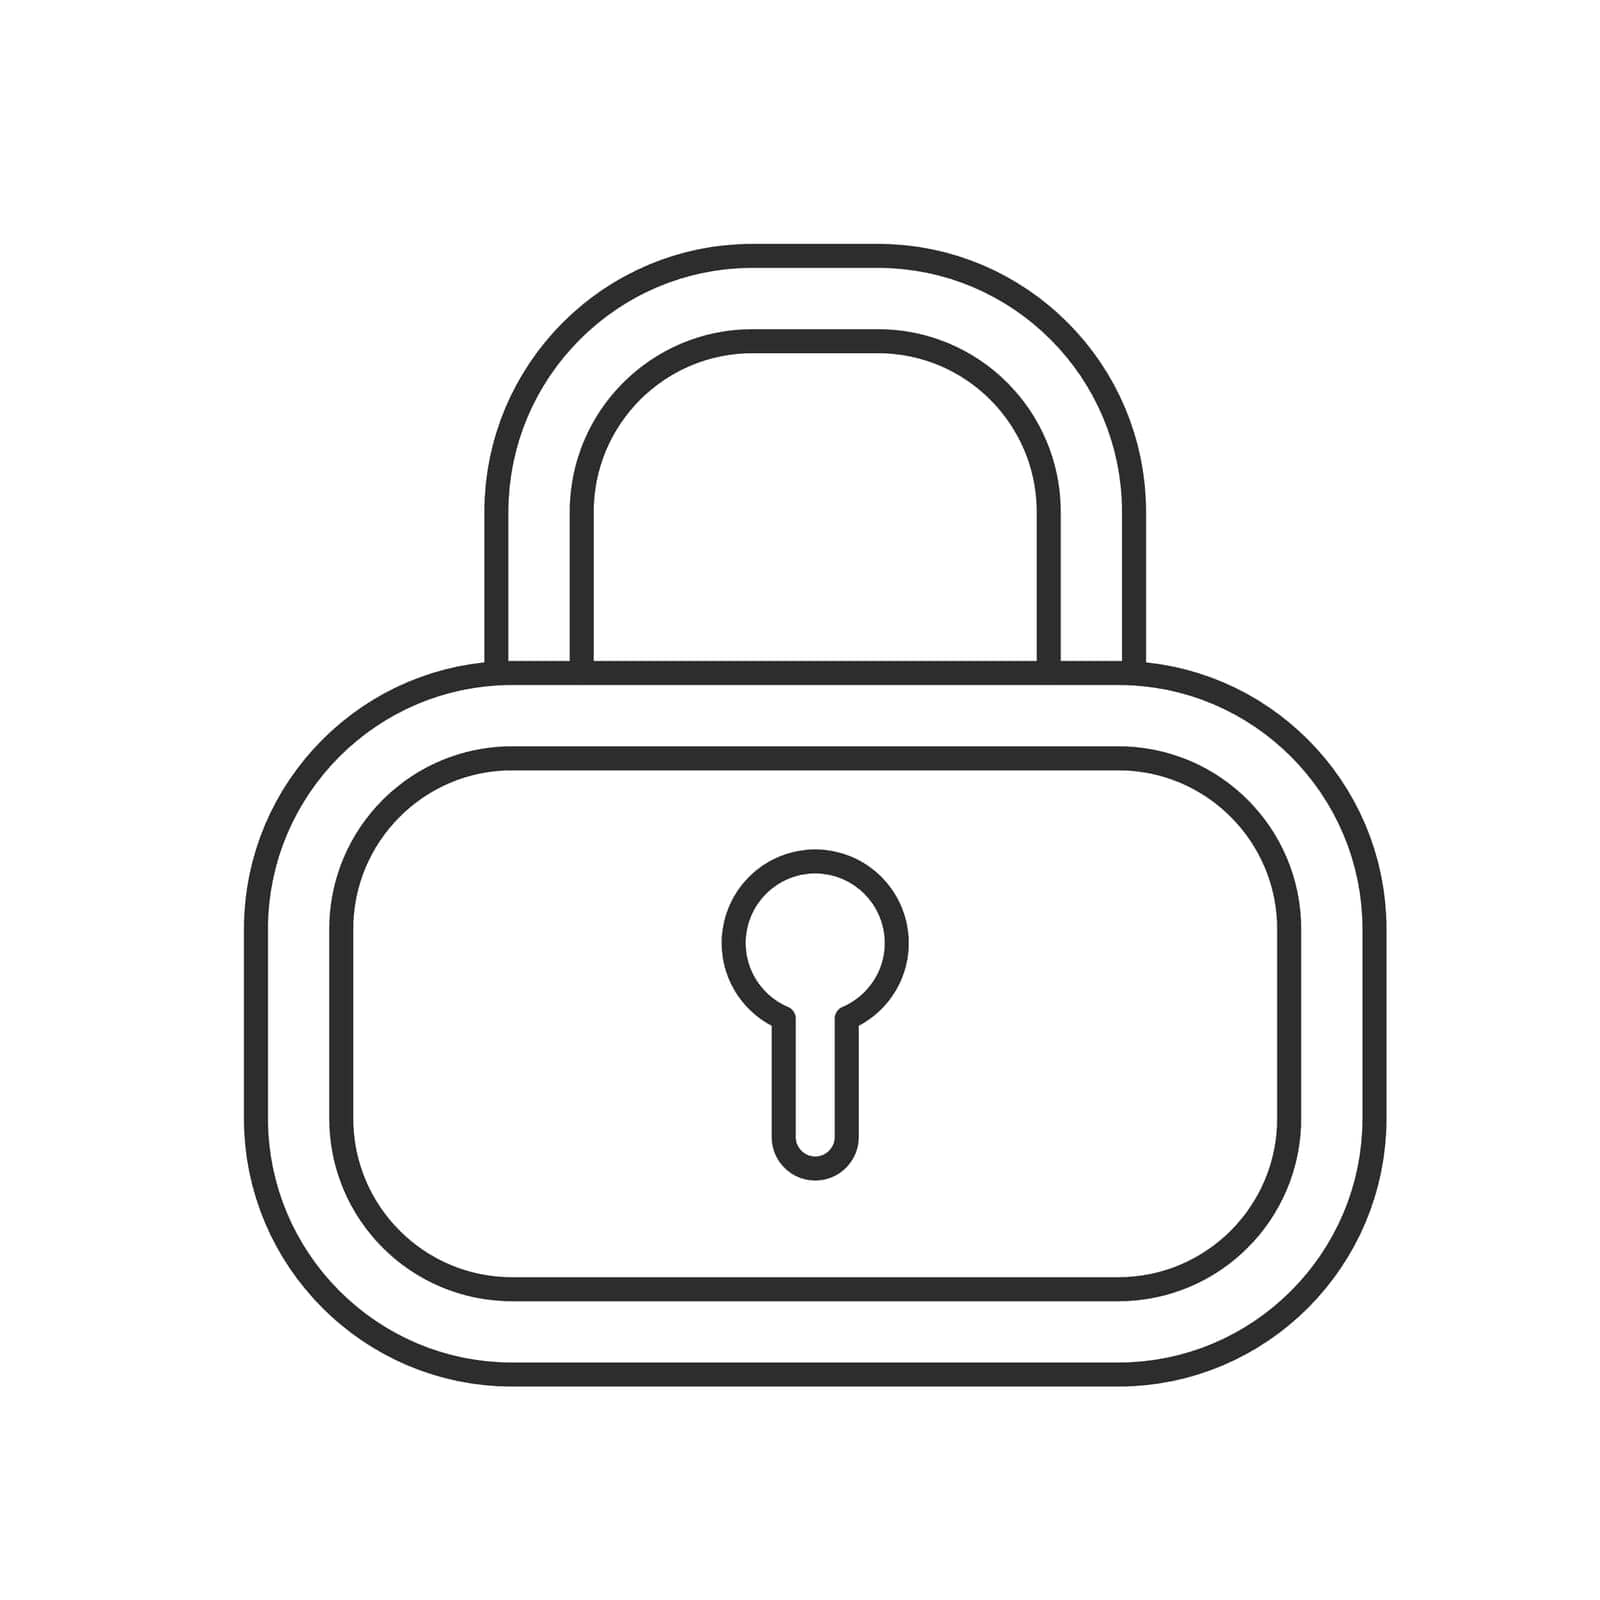 Lock icon with editable stroke. Cyber security